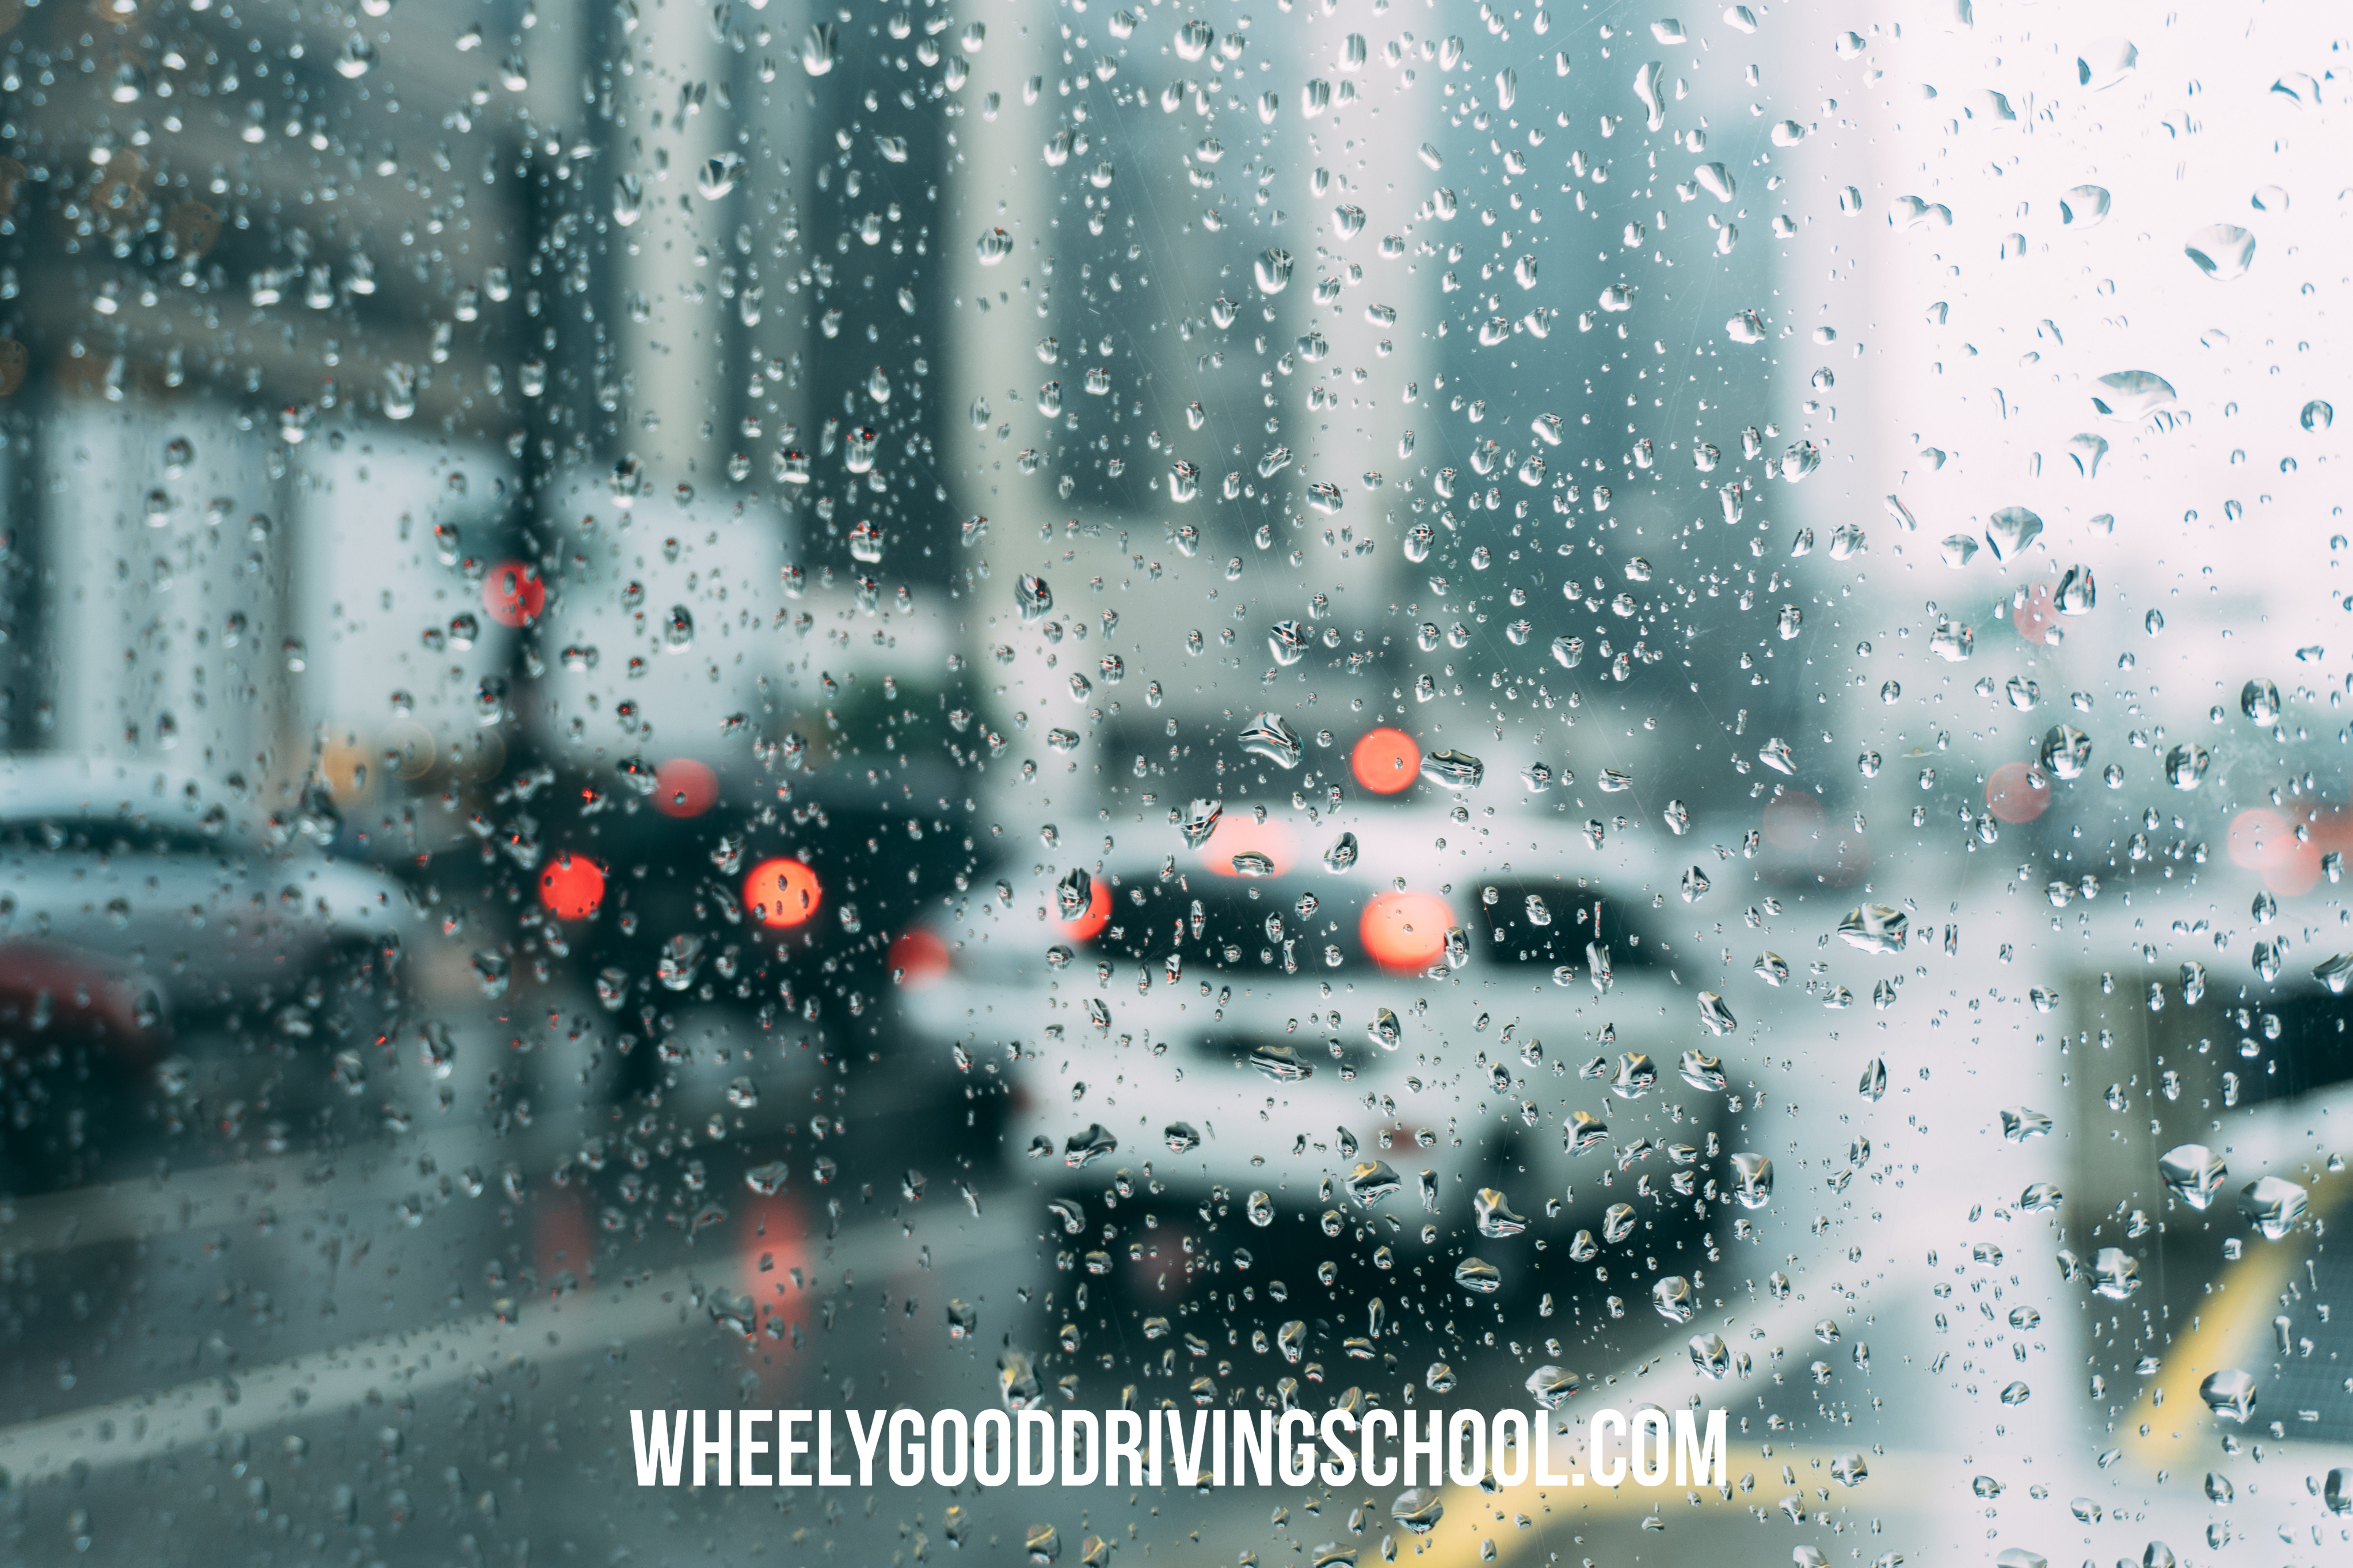 I Passed Driving School offers online driver education and behind the wheel training to assist in getting your young driver safely and confidently onto the road.